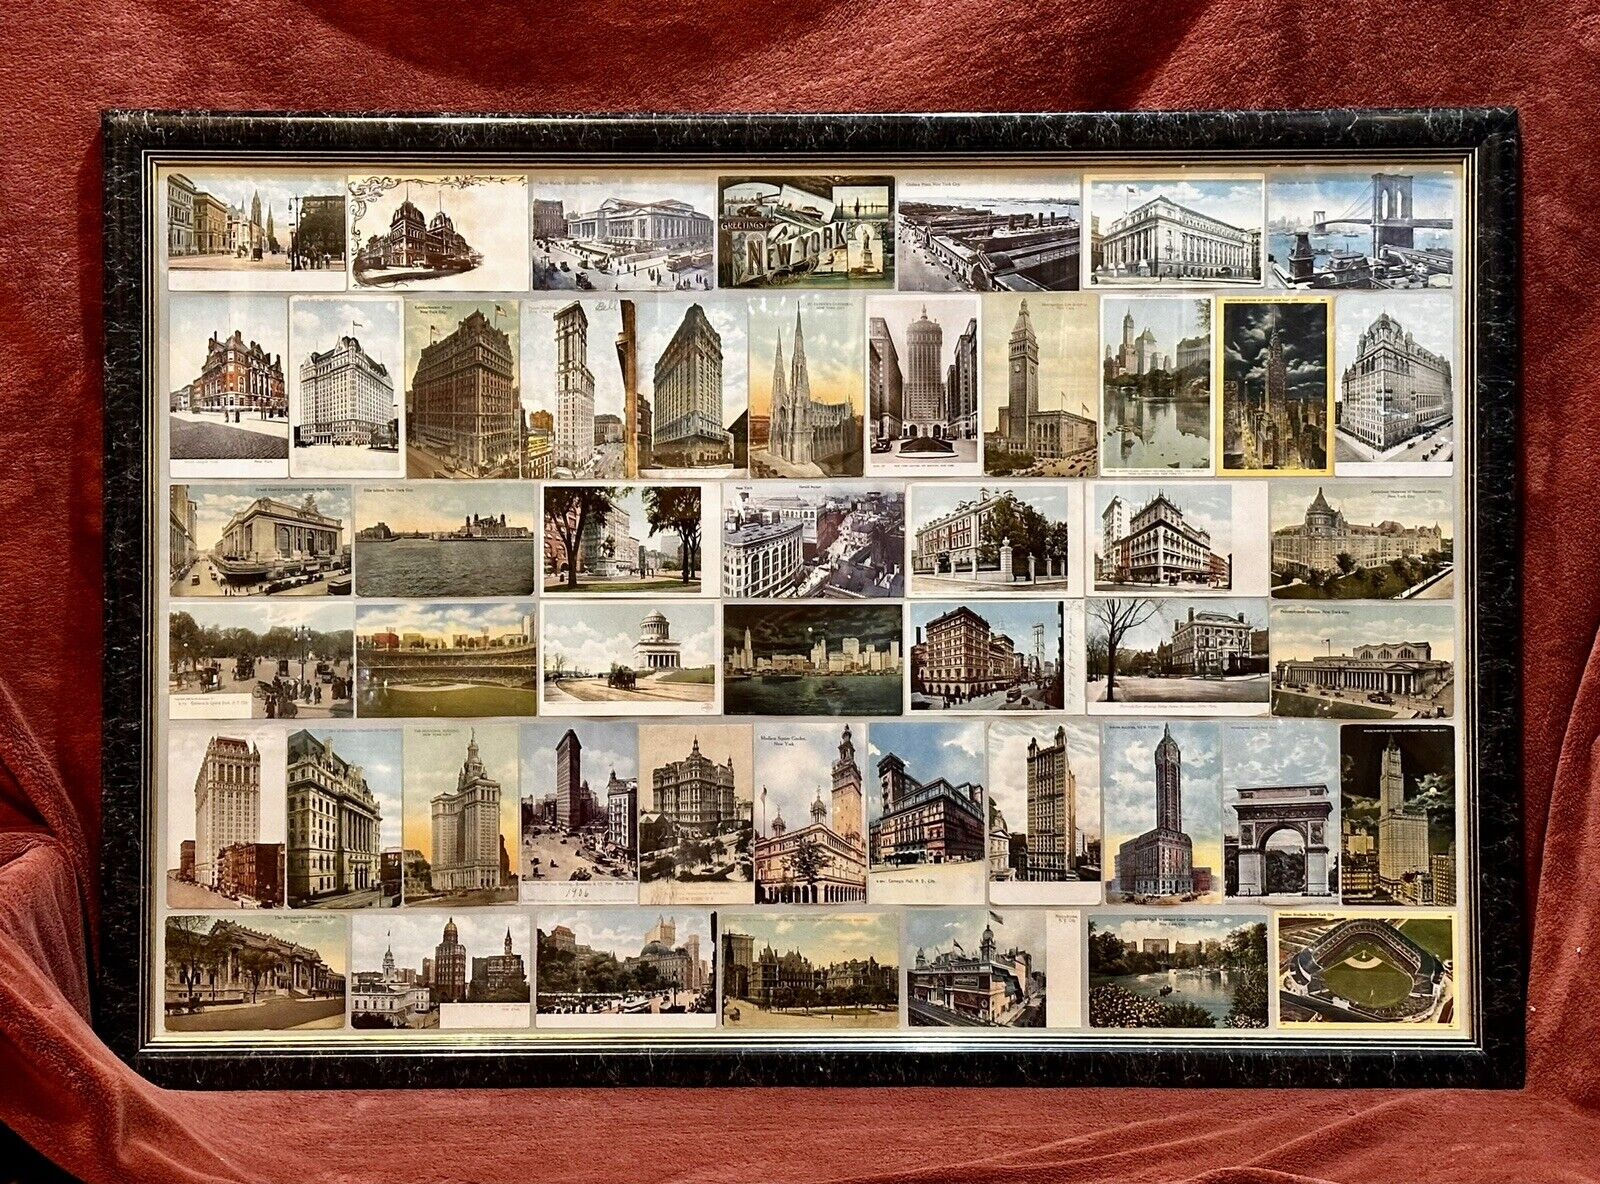 NEW YORK CITY Postcard Collage -42” X 29” - 50 PostCards In Total - Framed